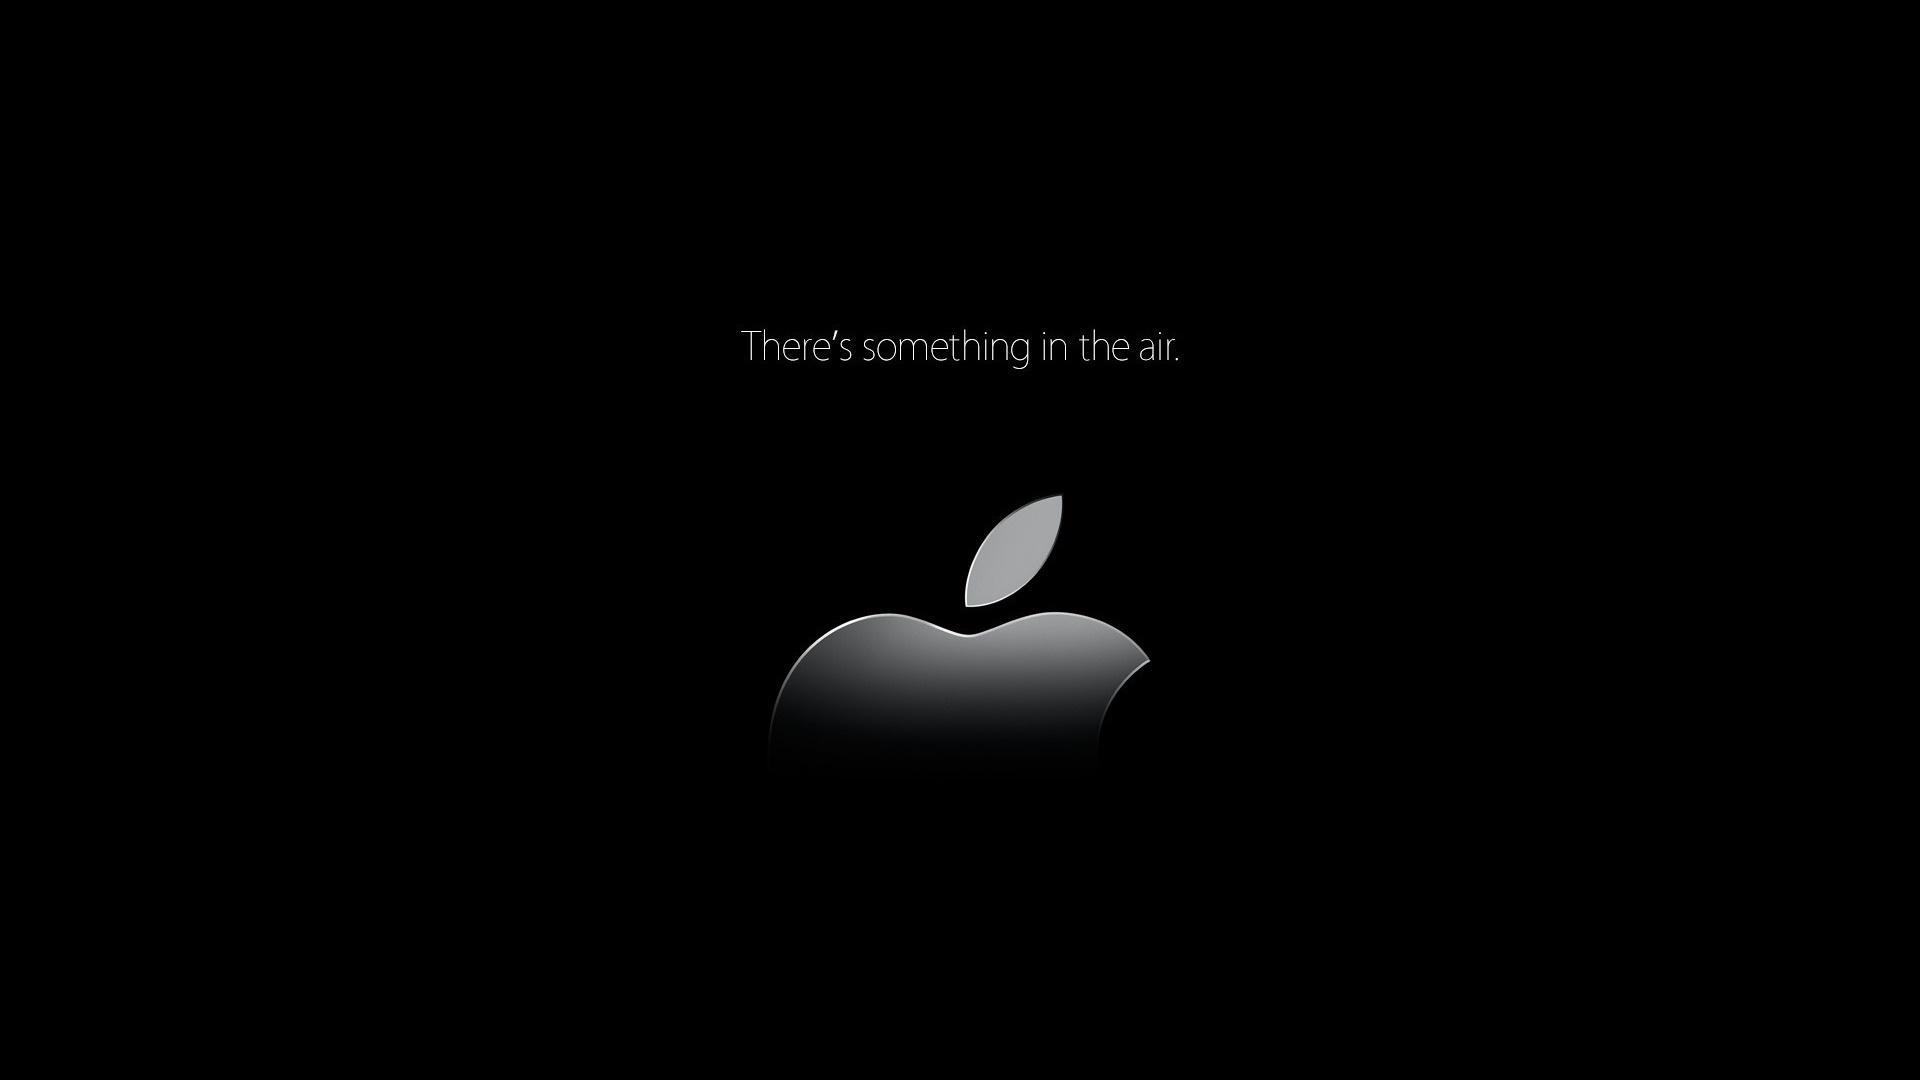 Black Apple Logo High Quality And Resolution Wallpaper